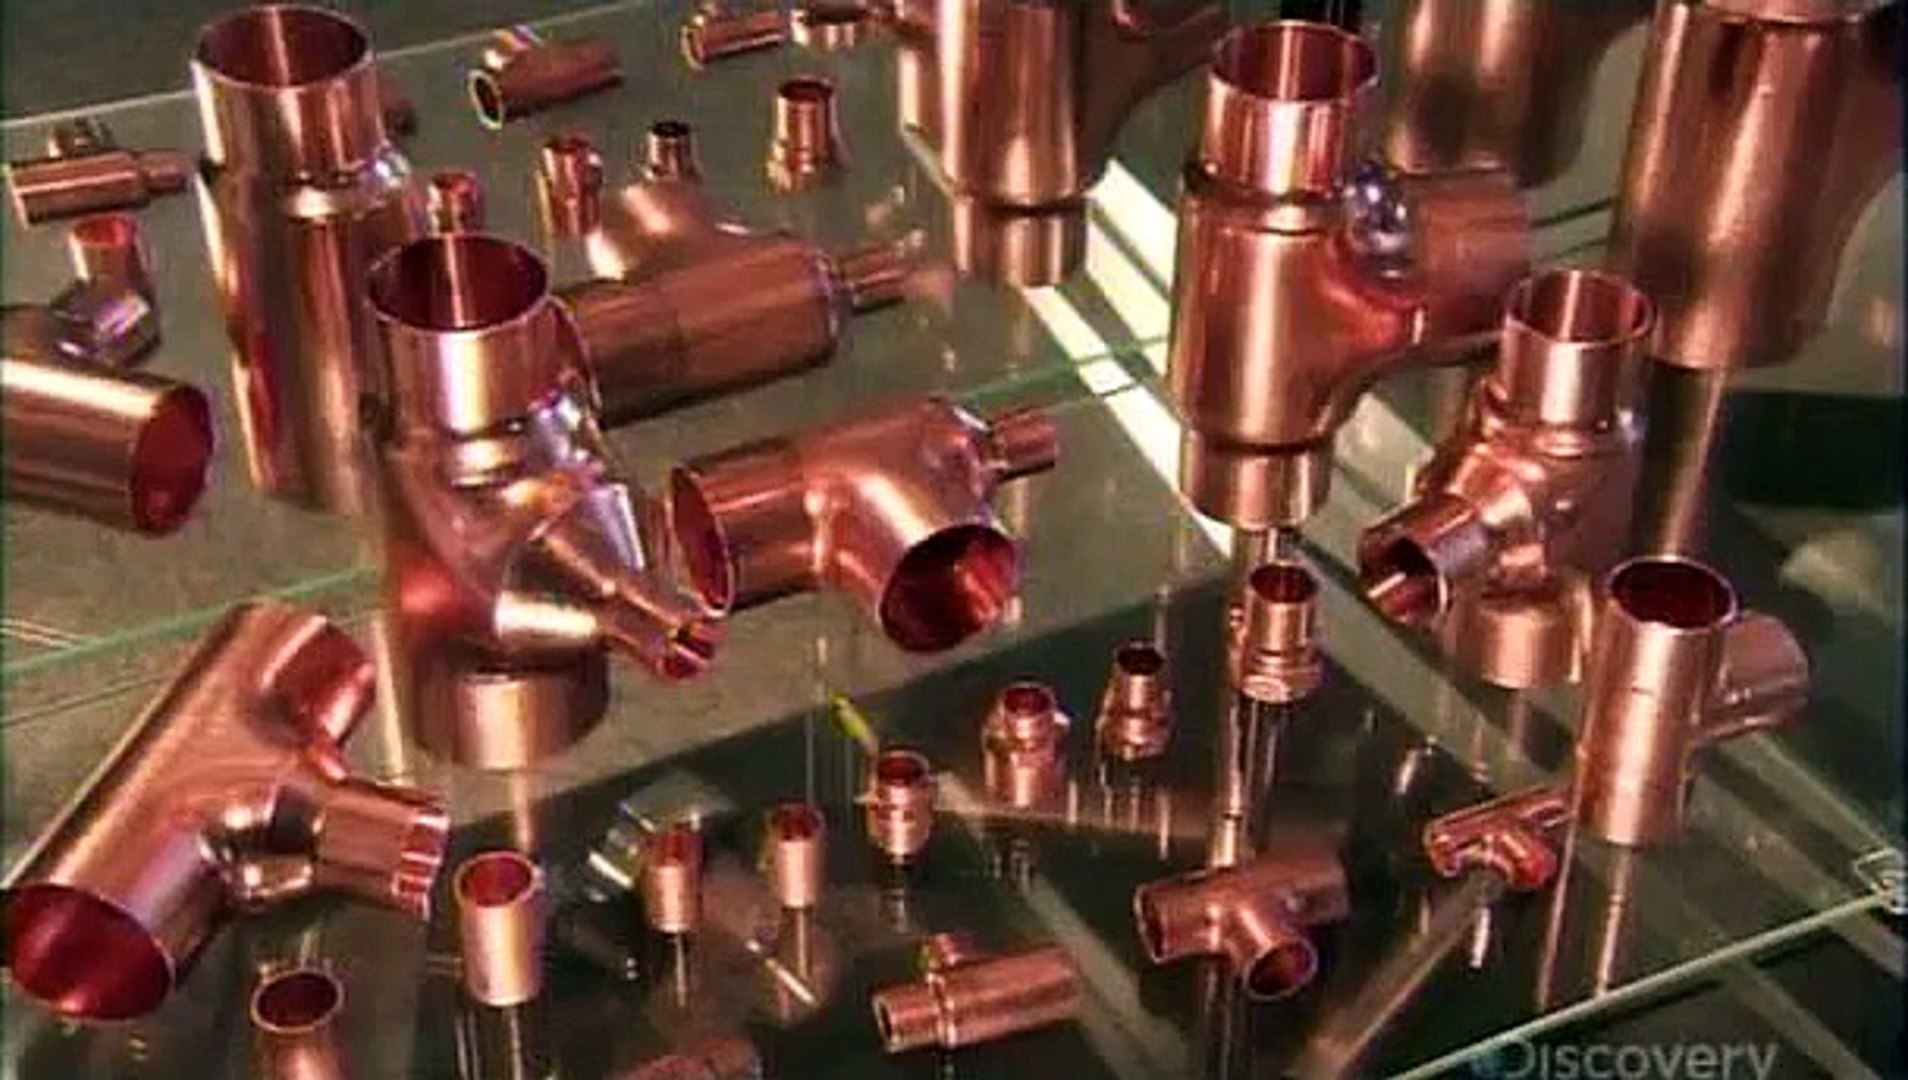 How Its Made 626 Copper Pipe Fittings - Dailymotion Video